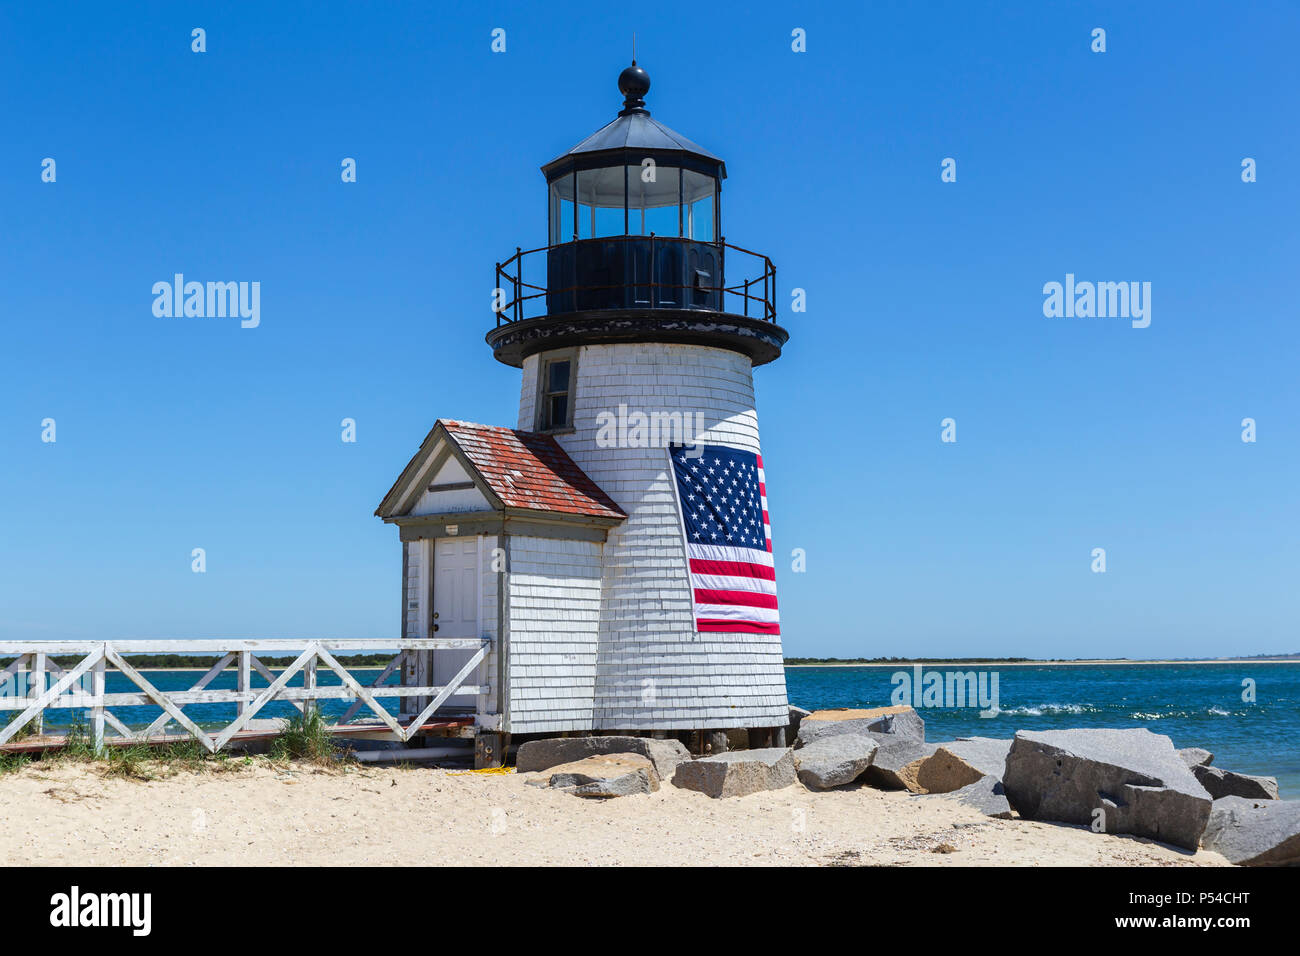 Brant Point Lighthouse protects mariners entering Nantucket Harbor on Nantucket Island. Stock Photo